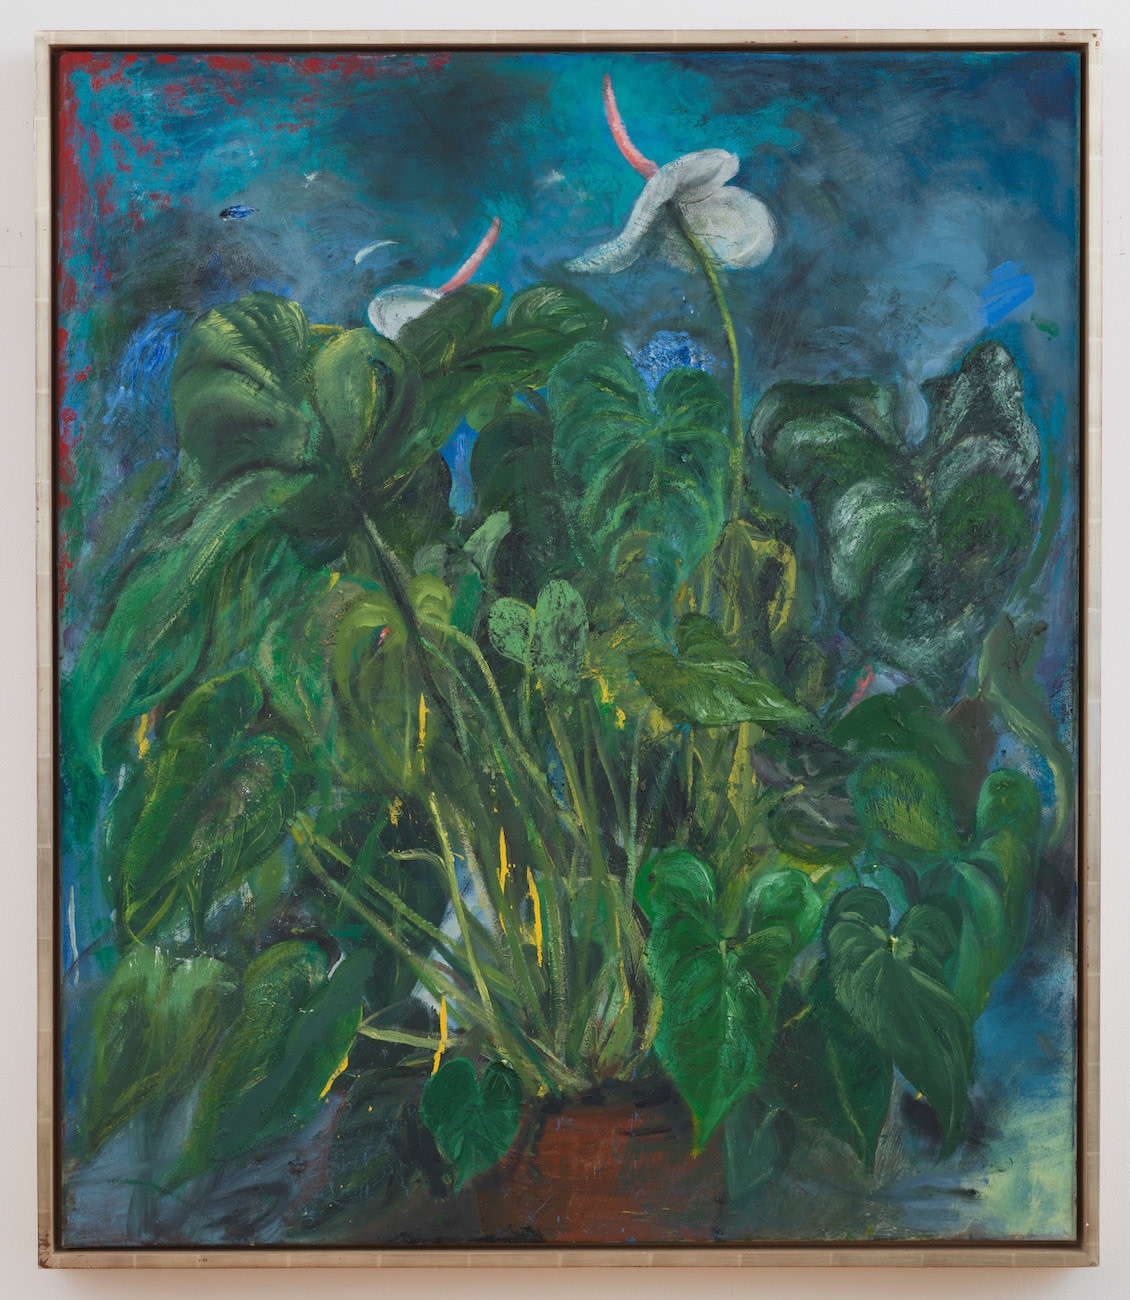 English January (2nd Version), 1992, Oil on canvas